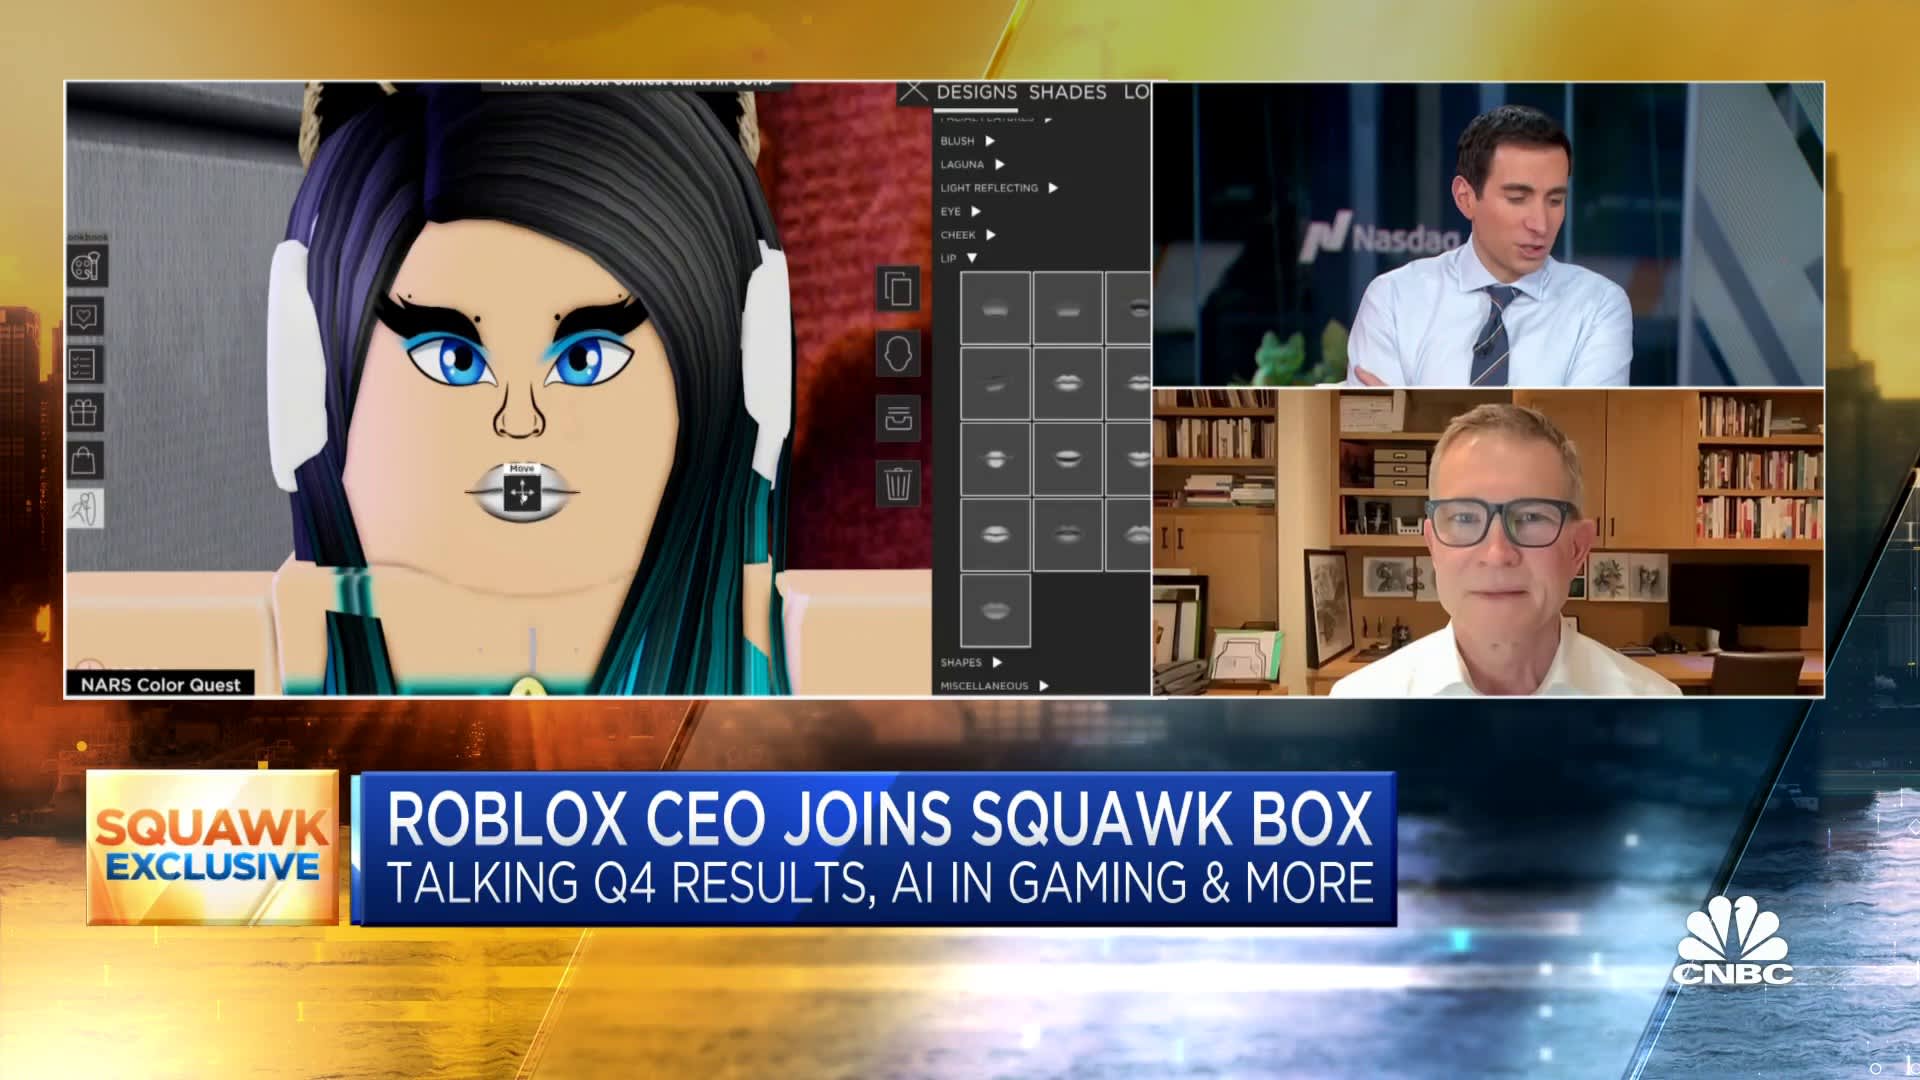 Roblox CEO says metaverse is still huge opportunity